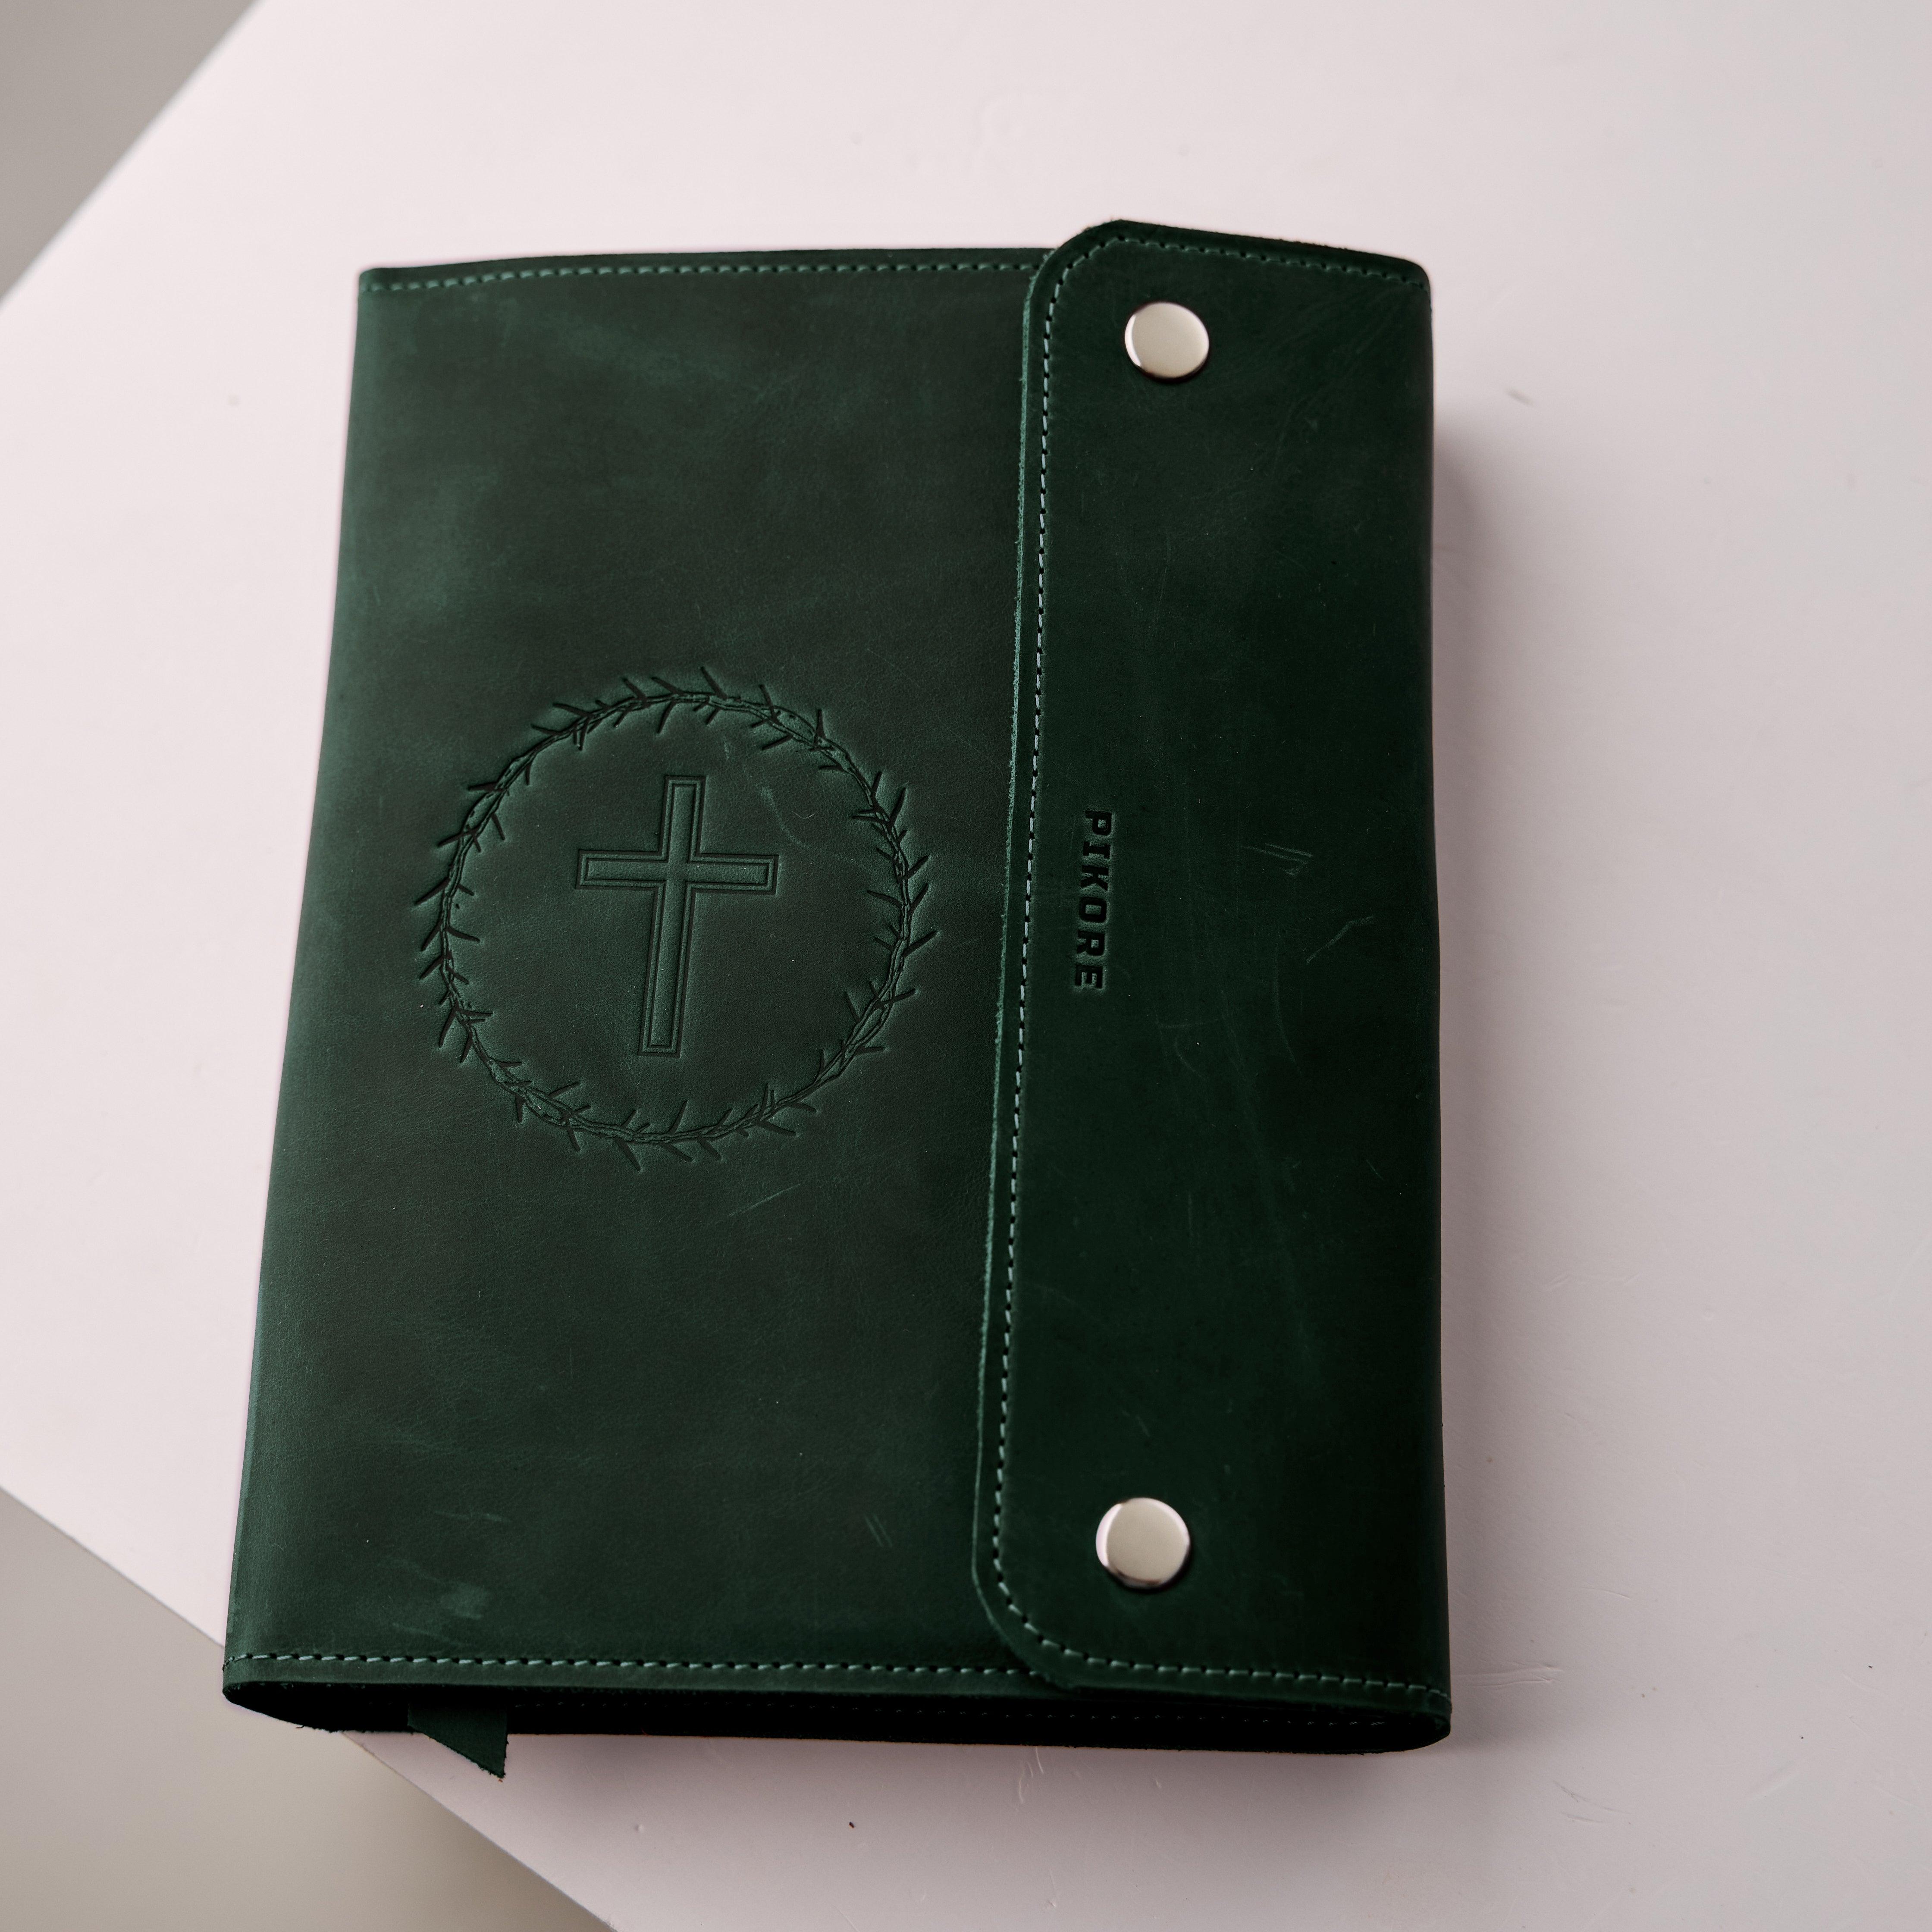 Leather Bible Rivets Cover - Pikore